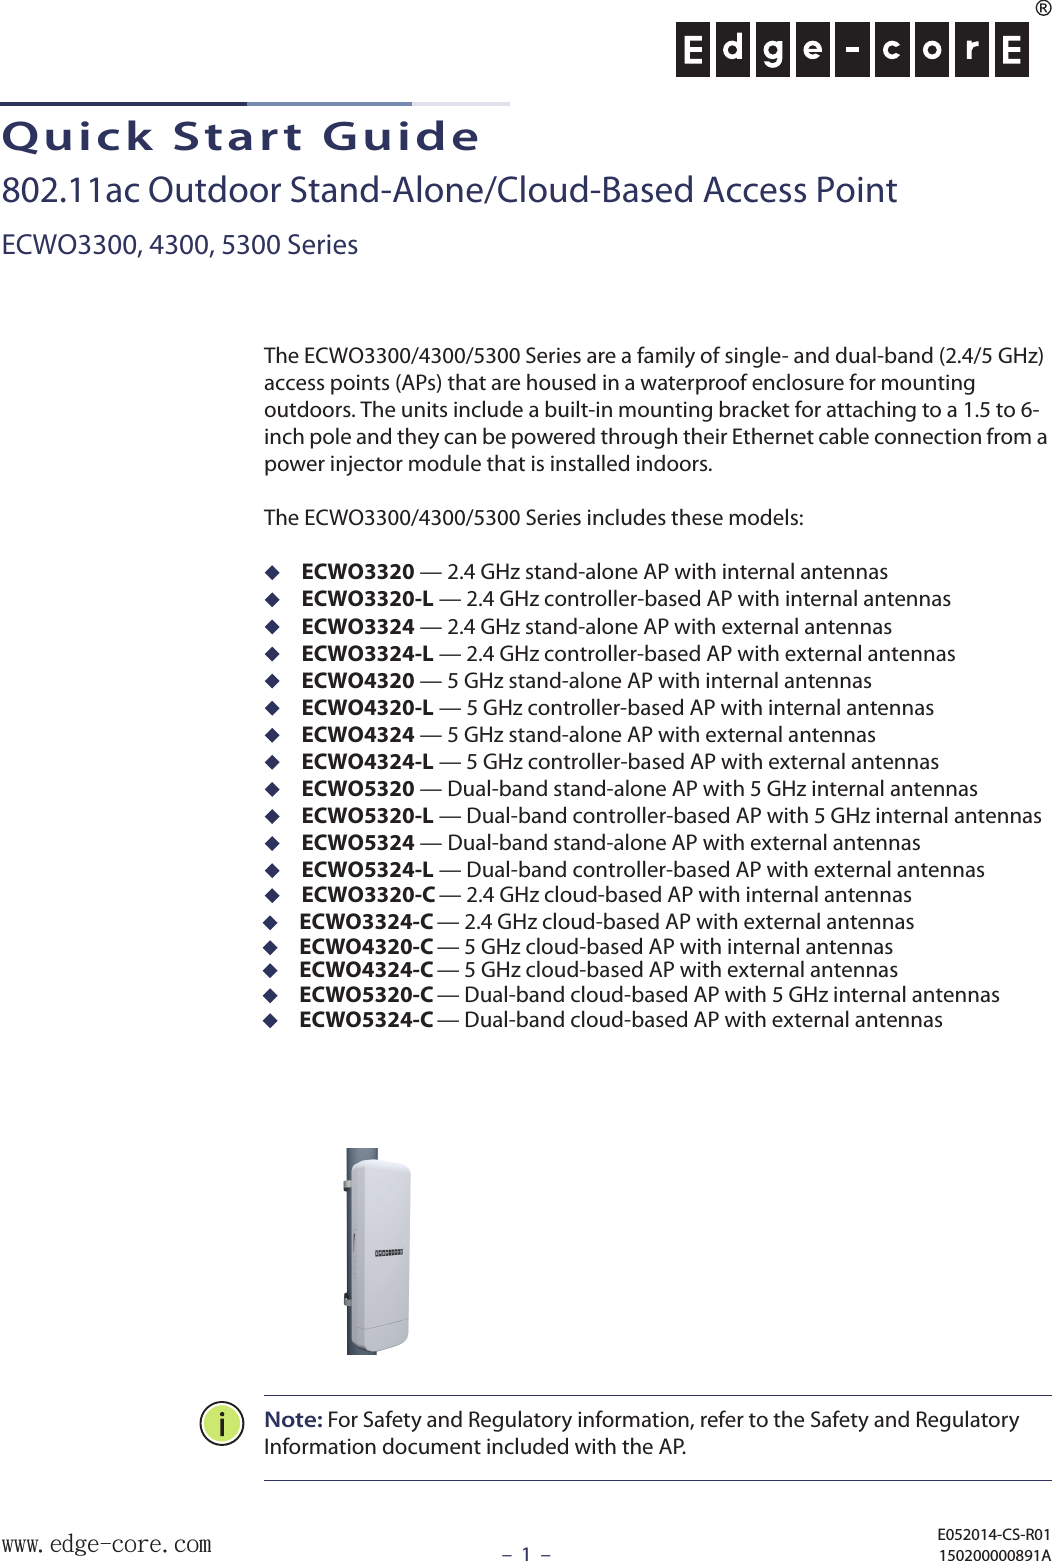 –  1  –Quick Start Guide802.11ac Outdoor Stand-Alone/Cloud-Based Access PointECWO3300, 4300, 5300 SeriesThe ECWO3300/4300/5300 Series are a family of single- and dual-band (2.4/5 GHz) access points (APs) that are housed in a waterproof enclosure for mounting outdoors. The units include a built-in mounting bracket for attaching to a 1.5 to 6-inch pole and they can be powered through their Ethernet cable connection from a power injector module that is installed indoors.The ECWO3300/4300/5300 Series includes these models:ECWO3320 — 2.4 GHz stand-alone AP with internal antennasECWO3320-L — 2.4 GHz controller-based AP with internal antennasECWO3324 — 2.4 GHz stand-alone AP with external antennasECWO3324-L — 2.4 GHz controller-based AP with external antennasECWO4320 — 5 GHz stand-alone AP with internal antennasECWO4320-L — 5 GHz controller-based AP with internal antennasECWO4324 — 5 GHz stand-alone AP with external antennasECWO4324-L — 5 GHz controller-based AP with external antennasECWO5320 — Dual-band stand-alone AP with 5 GHz internal antennasECWO5320-L — Dual-band controller-based AP with 5 GHz internal antennasECWO5324 — Dual-band stand-alone AP with external antennasECWO5324-L — Dual-band controller-based AP with external antennas Note: For Safety and Regulatory information, refer to the Safety and Regulatory Information document included with the AP.E052014-CS-R01150200000891Awww.edge-core.comECWO3320-C — 2.4 GHz cloud-based AP with internal antennasECWO3324-C — 2.4 GHz cloud-based AP with external antennasECWO4320-C — 5 GHz cloud-based AP with internal antennasECWO4324-C — 5 GHz cloud-based AP with external antennasECWO5320-C — Dual-band cloud-based AP with 5 GHz internal antennasECWO5324-C — Dual-band cloud-based AP with external antennas